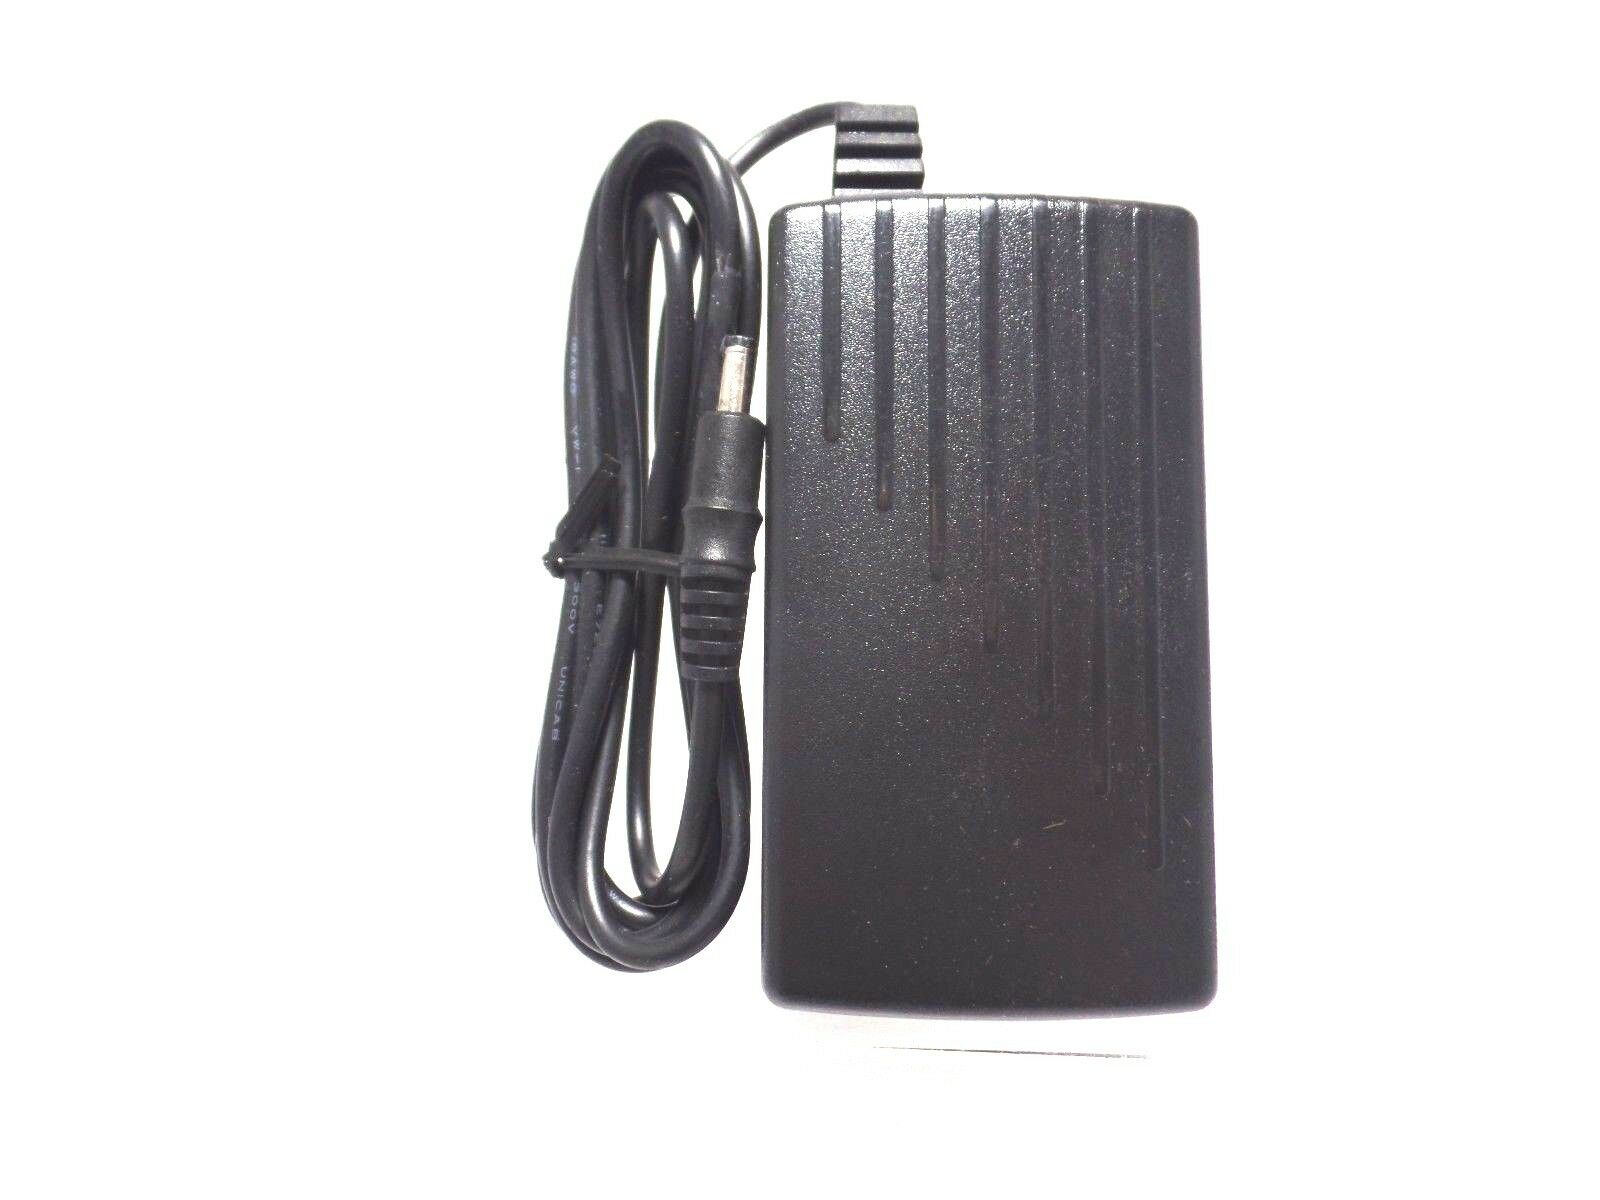 Motorola 50-14000-239R AC Adapter 9V 2A, For Phaser P360, P370 For LS3478-ER Condition: "Brand New.